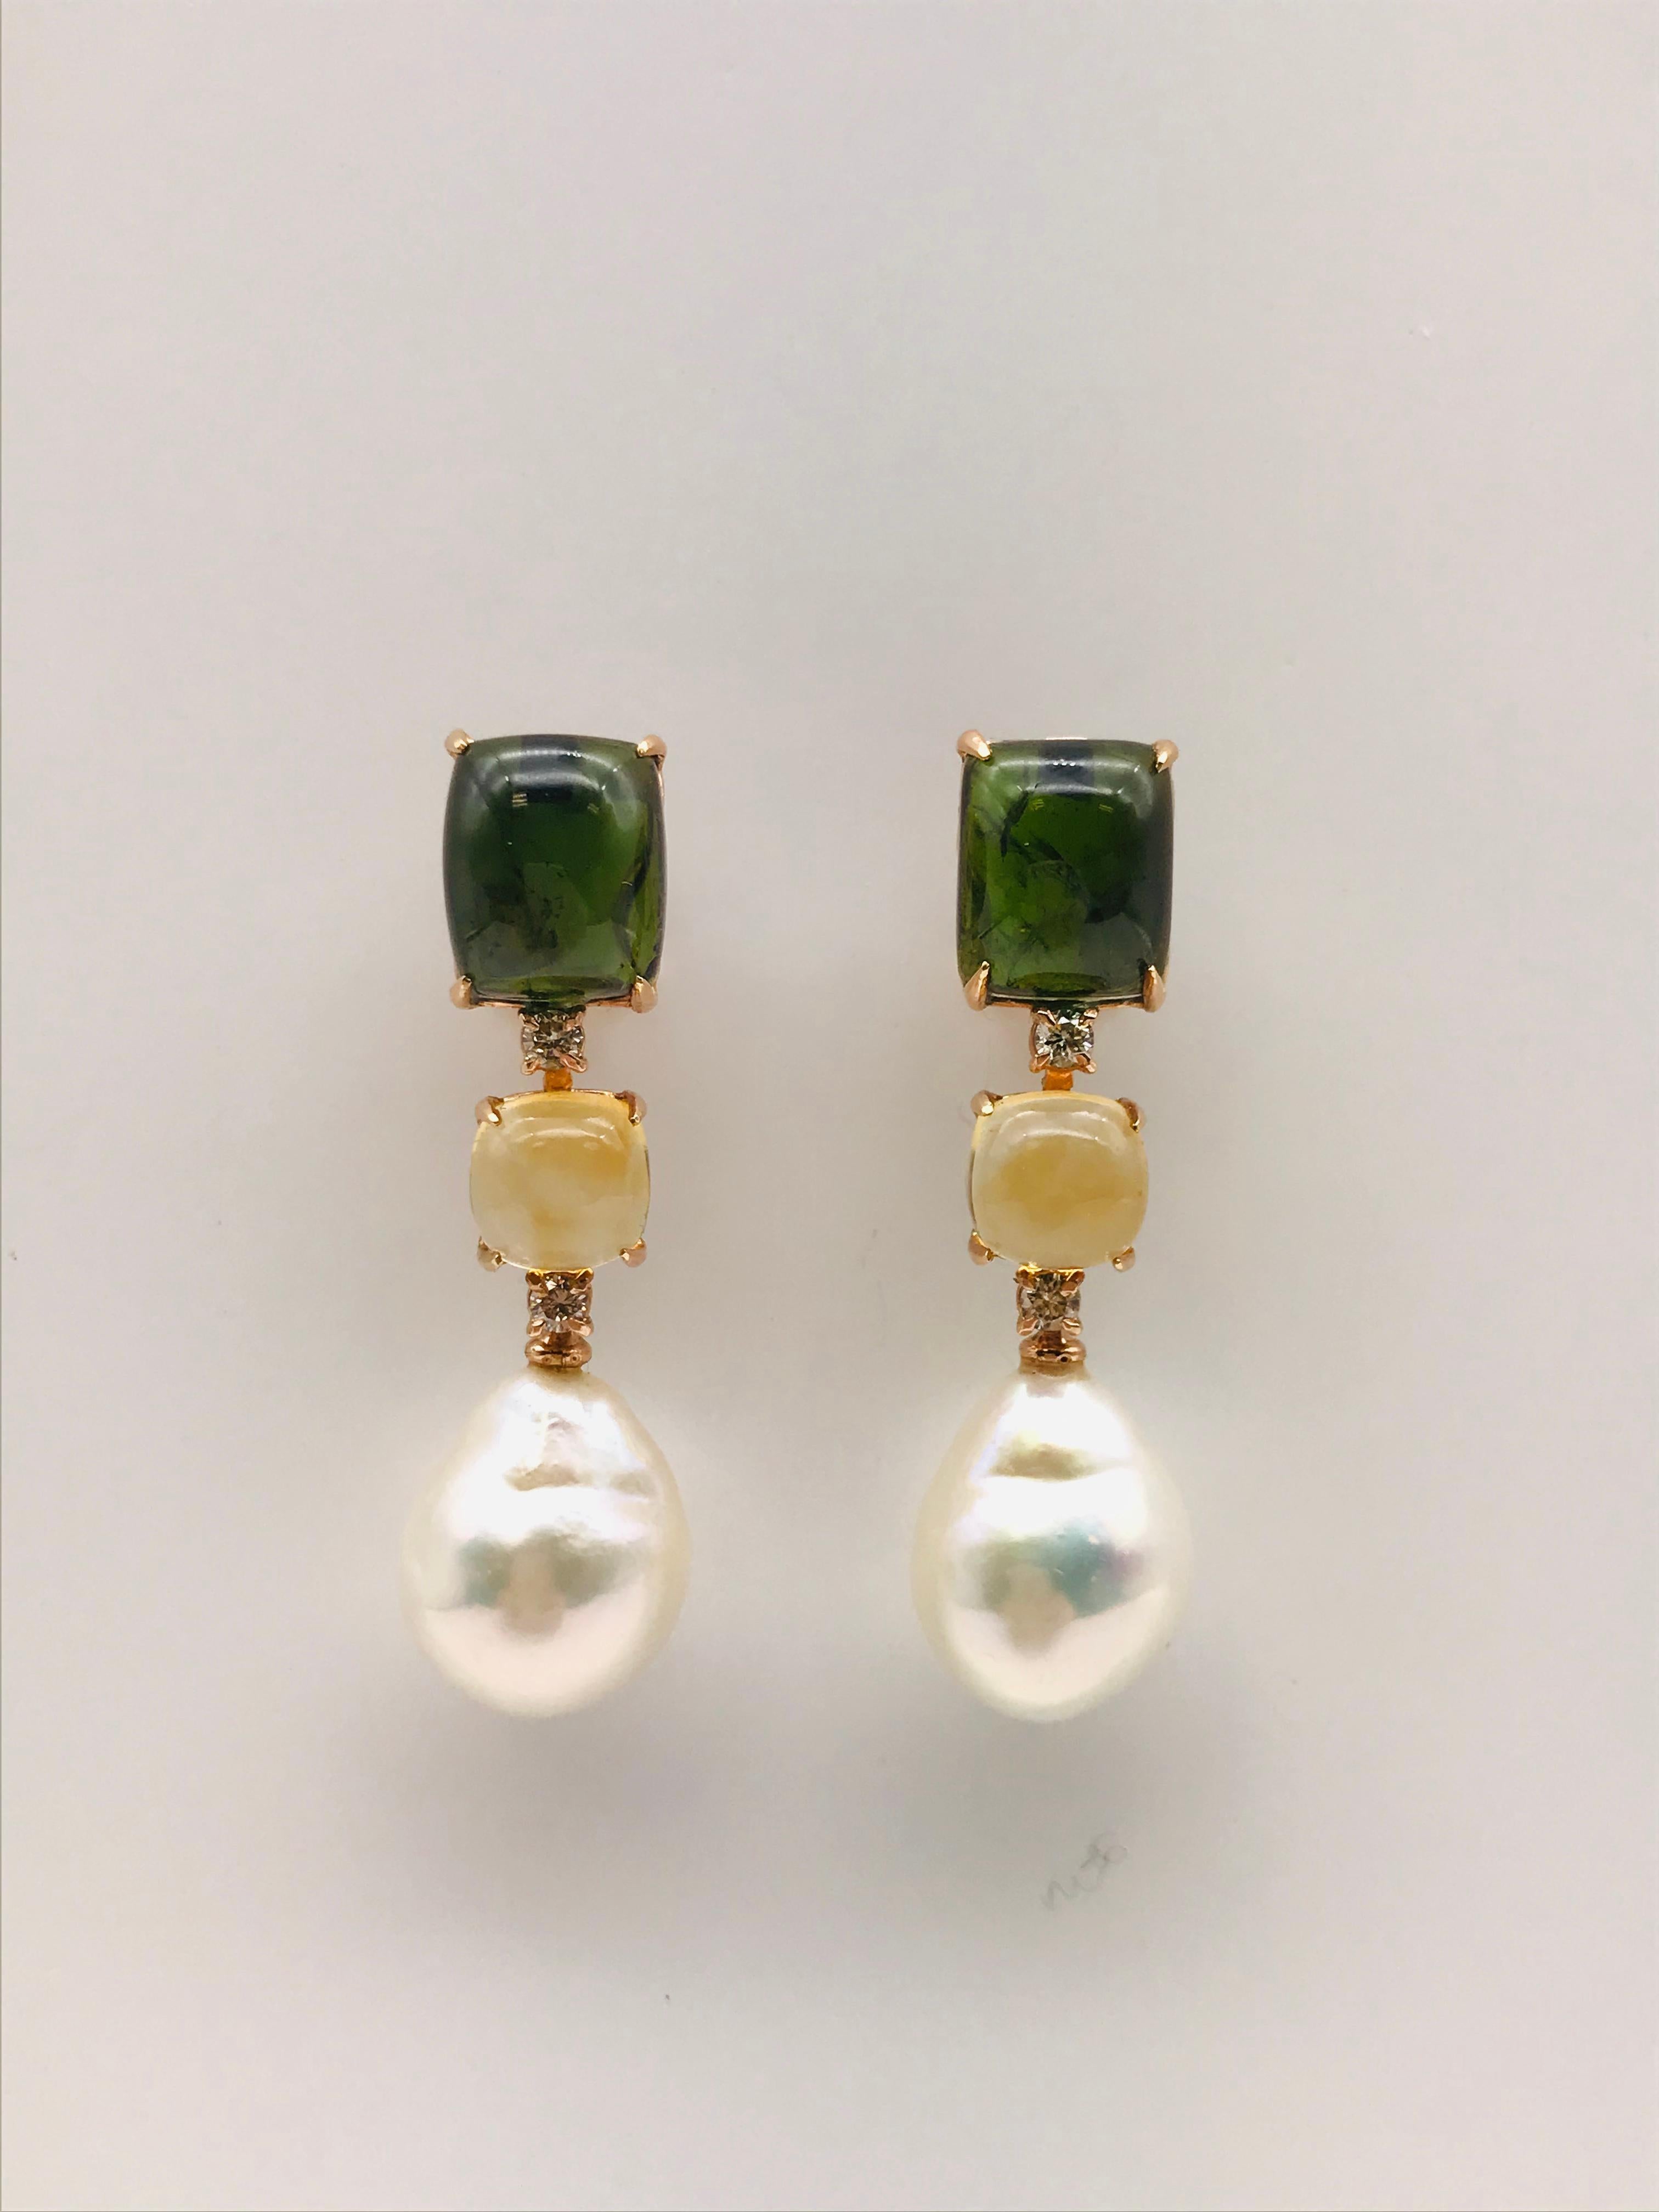 Green Tourmaline, Citrine, and Brown Diamonds with Baroque Pearls on Gold Chandelier Earring 
Natural Green Tourmaline 
Natural Citrine 
Brown Diamonds 
Yellow Gold 18k 5.40 Grams 
Chandelier Earrings
Can be adapted to ear not pierced
